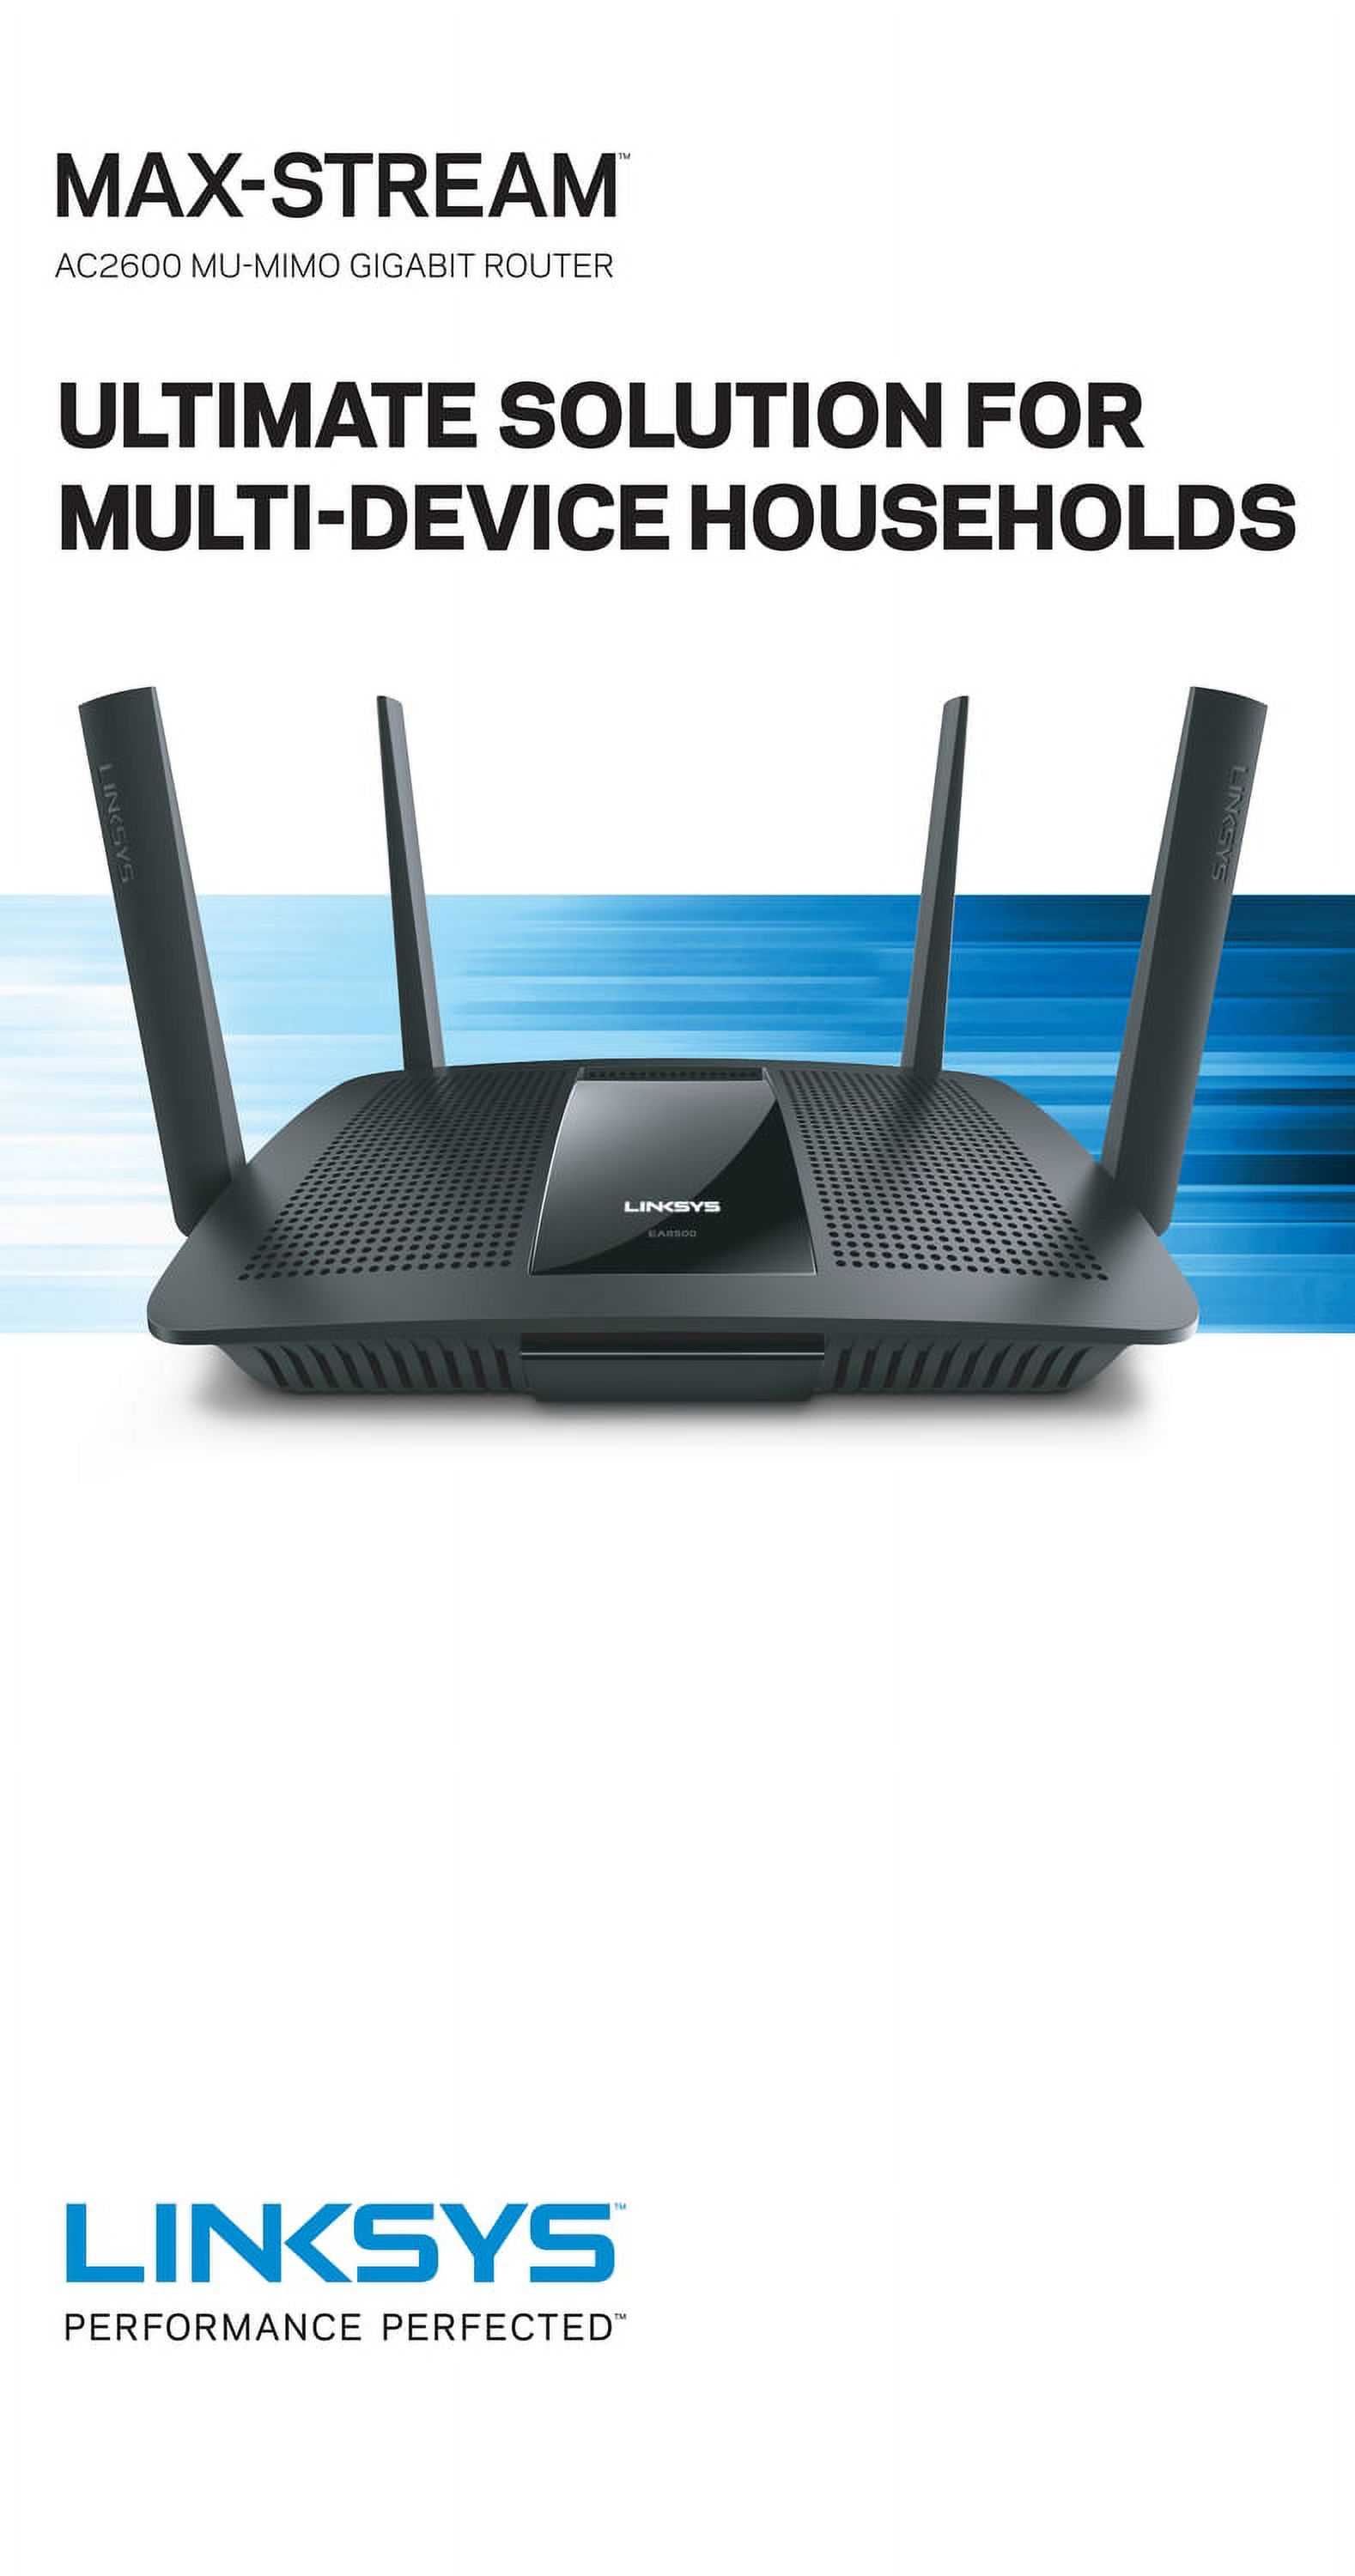 Linksys AC2600 4x4 MU-MIMO Dual-Band Gigabit Router with USB 3.0 and eSATA (EA8100) - image 7 of 9